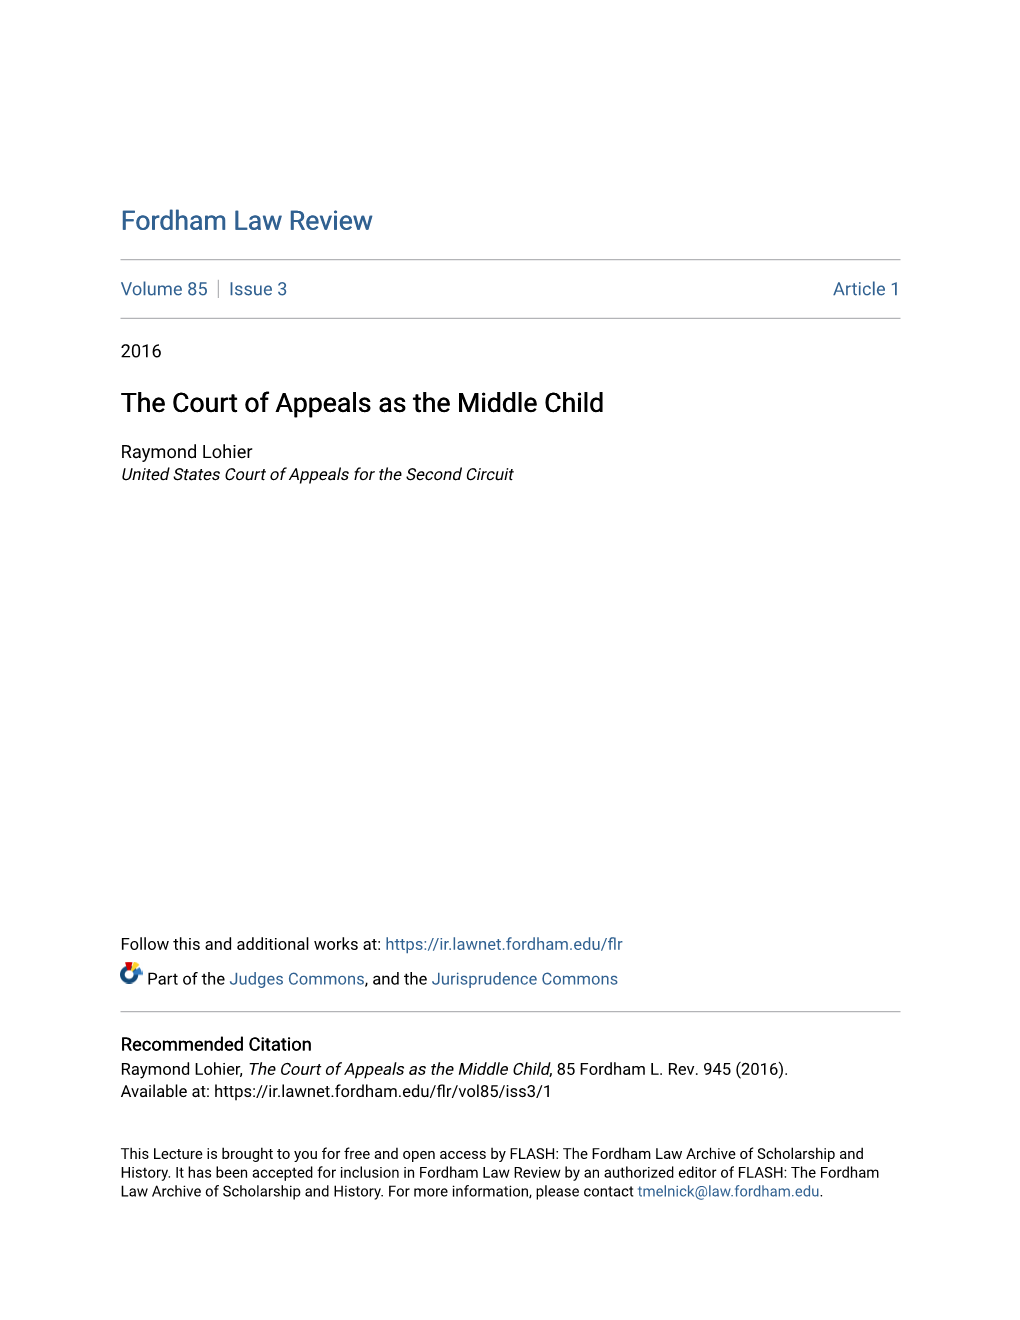 The Court of Appeals As the Middle Child